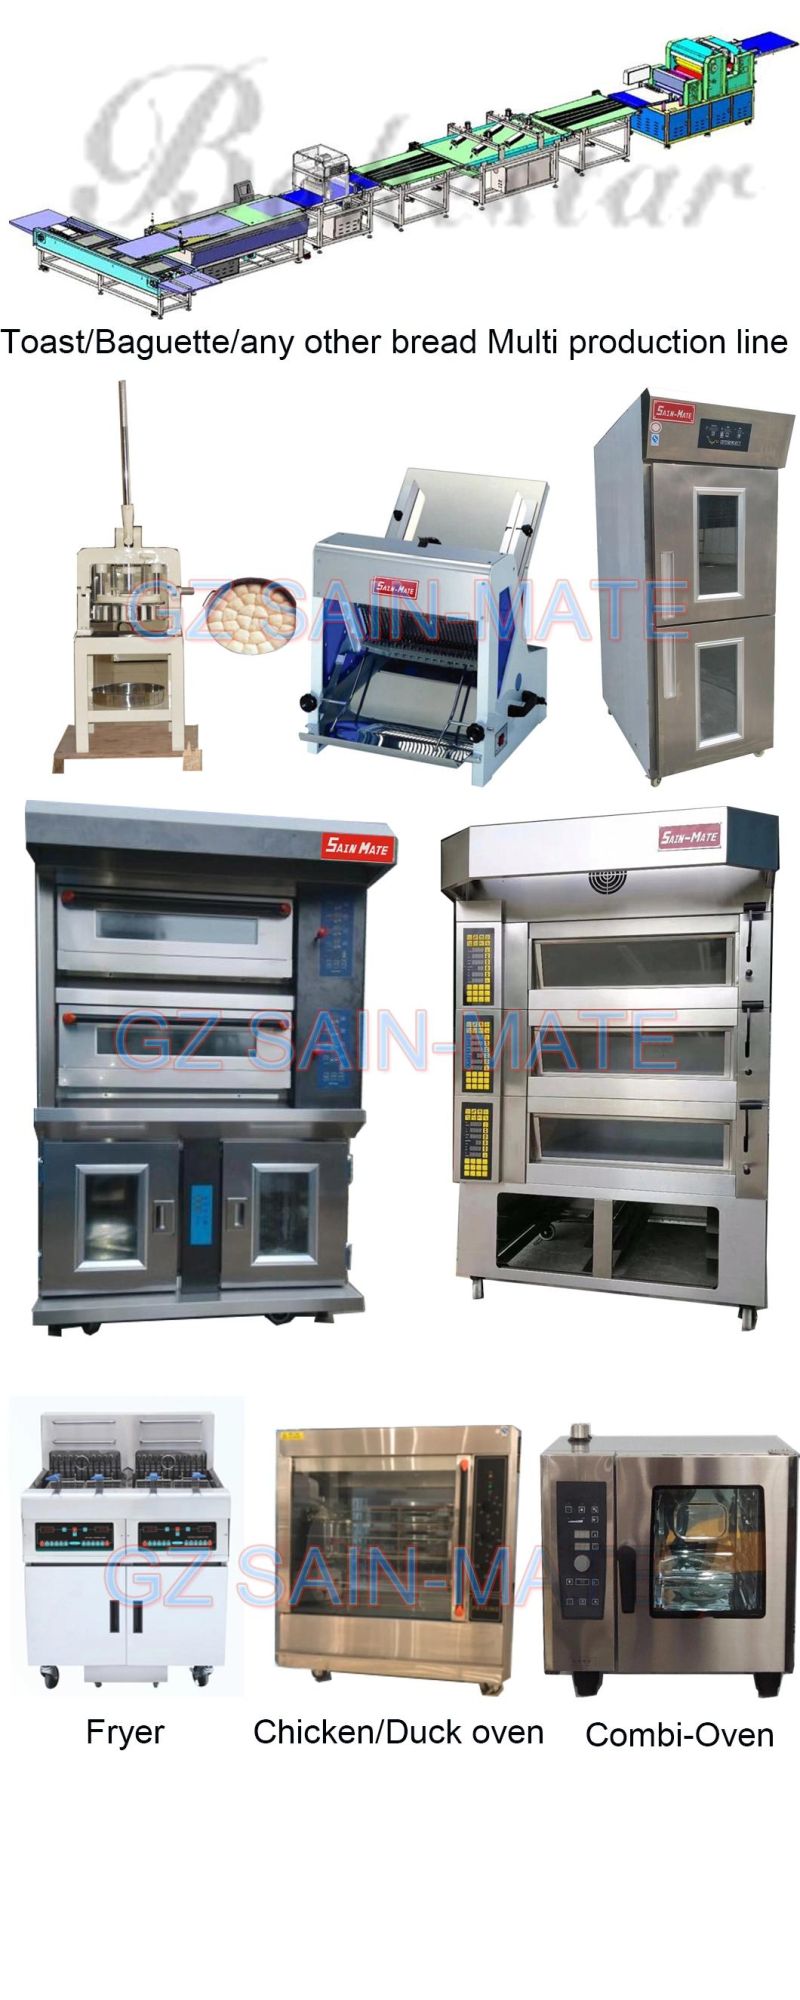 Gas Diesel Electric Industrial Rotary Oven for Bakery Sale Bread Baking, Italy Commercial 8 10 12 16 32 64 Trays Rack Rotary Oven Price